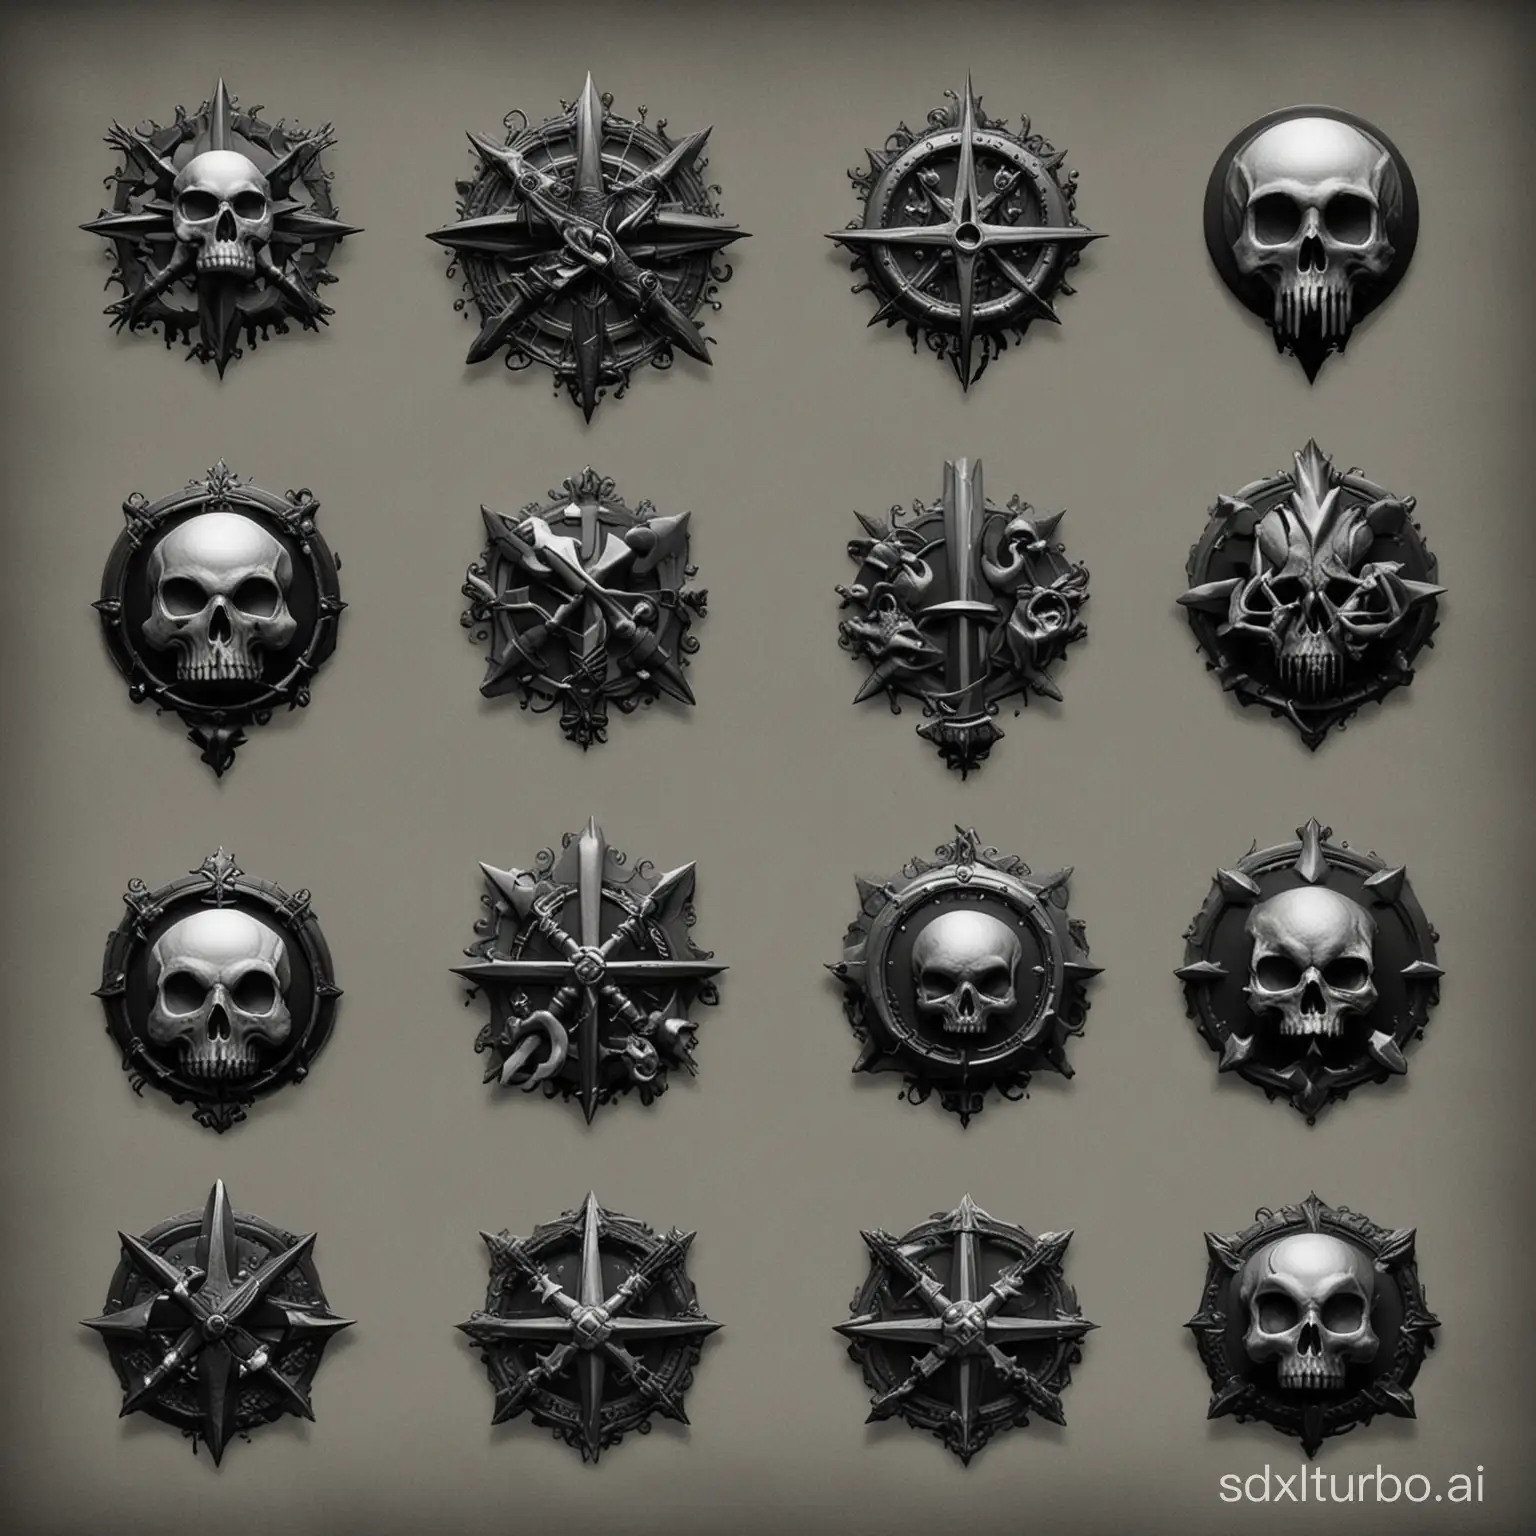 Step into the shadows of the digital realm with our Gothic Browser Icons collection. Crafted with meticulous attention to detail, these icons are designed to add a touch of mystique and darkness to your browsing experience.

Explore a world where the familiar symbols of web navigation are transformed into hauntingly beautiful works of art. Each icon is a masterpiece in its own right, blending elements of gothic architecture, symbolism, and aesthetics to create a truly captivating visual experience.

Whether you're a developer looking to add a unique flair to your browser application or a user seeking to customize your desktop with a darker aesthetic, our Gothic Browser Icons are sure to leave a lasting impression.

From intricately detailed compass roses to ornate skull and crossbones motifs, our collection offers a diverse range of icons to suit any browsing environment. Let your imagination run wild as you navigate the web with these evocative symbols by your side.

Join us on a journey into the unknown, where every click brings you one step closer to uncovering the secrets of the digital underworld. Embrace the darkness and unleash the power of our Gothic Browser Icons today.
